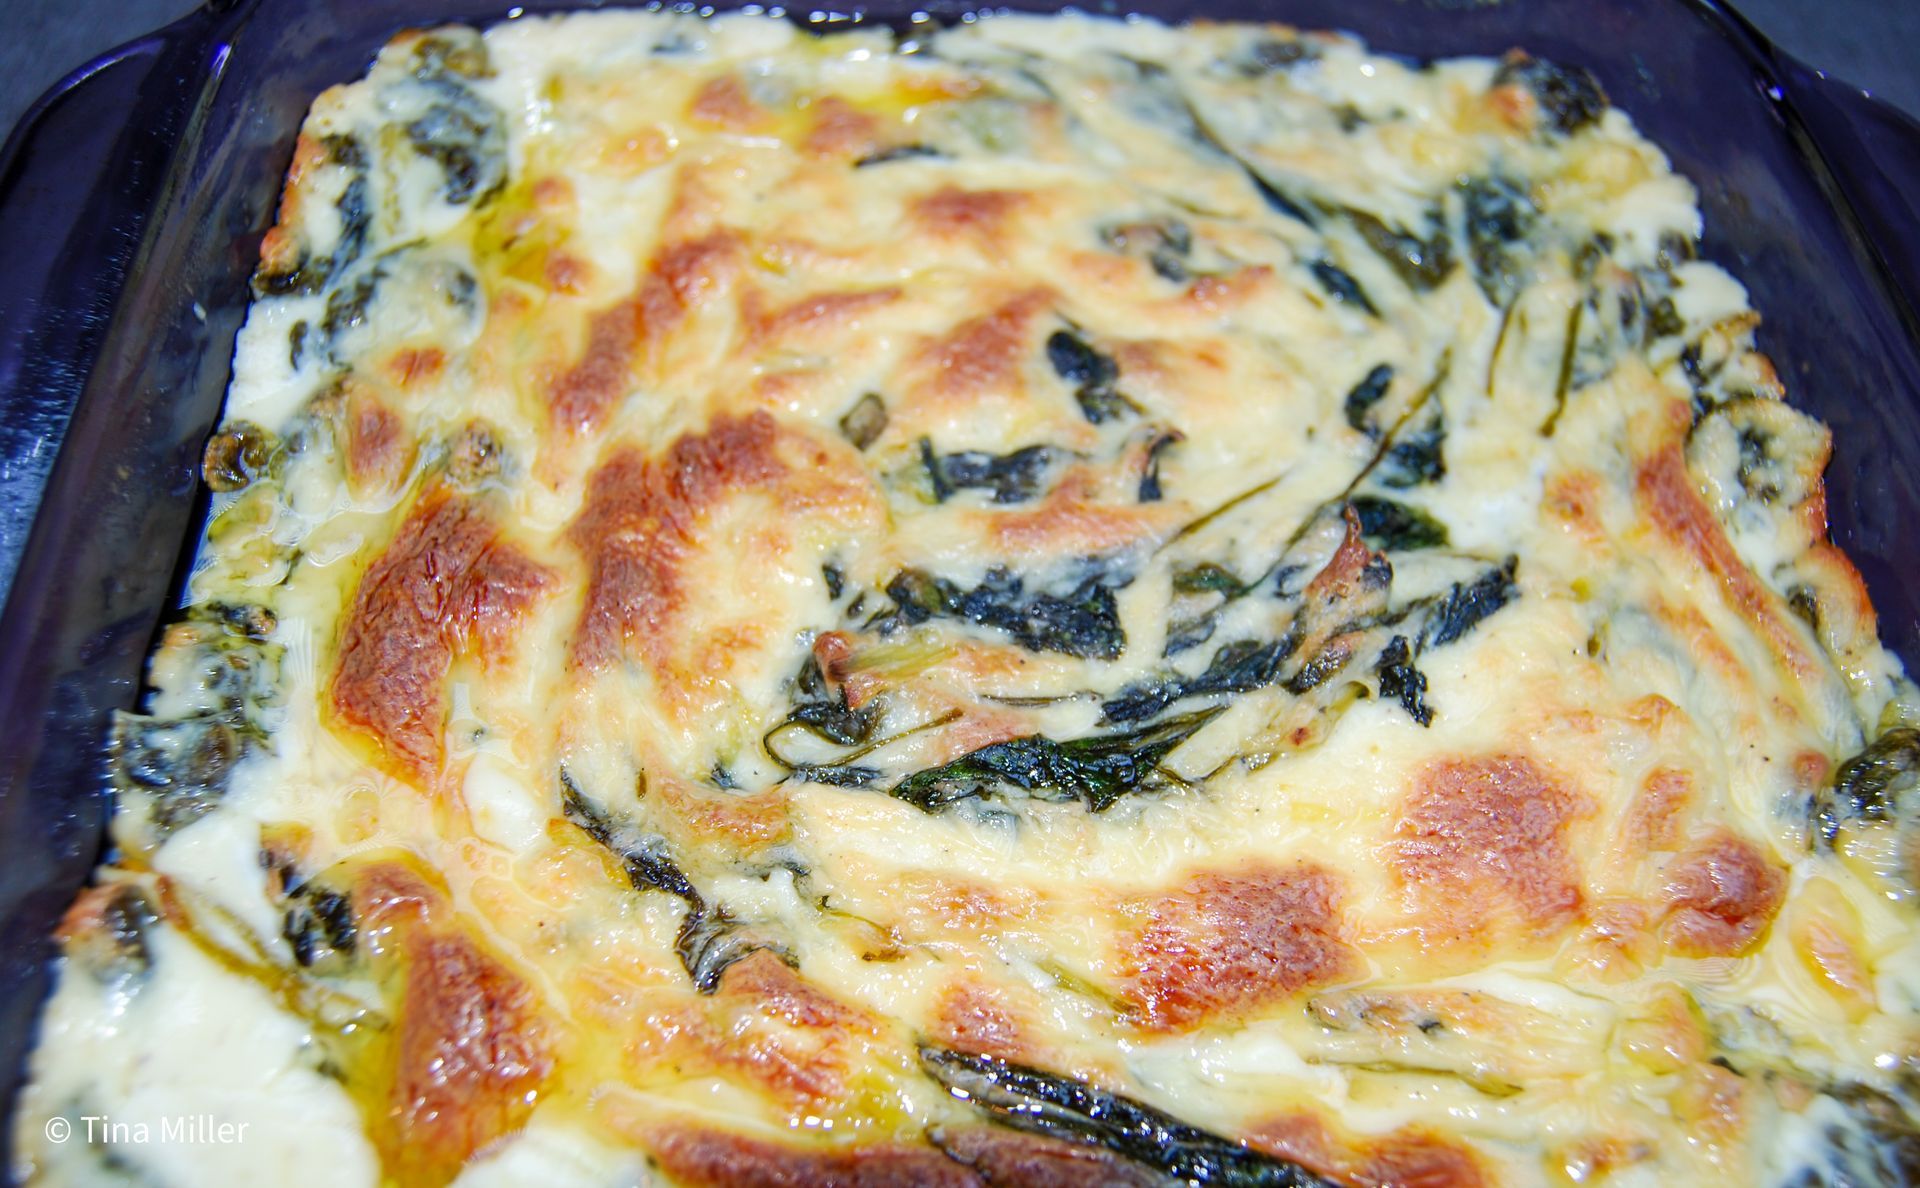 Spinach and artichoke dip into a 9x9 casserole dish after backing in the oven.